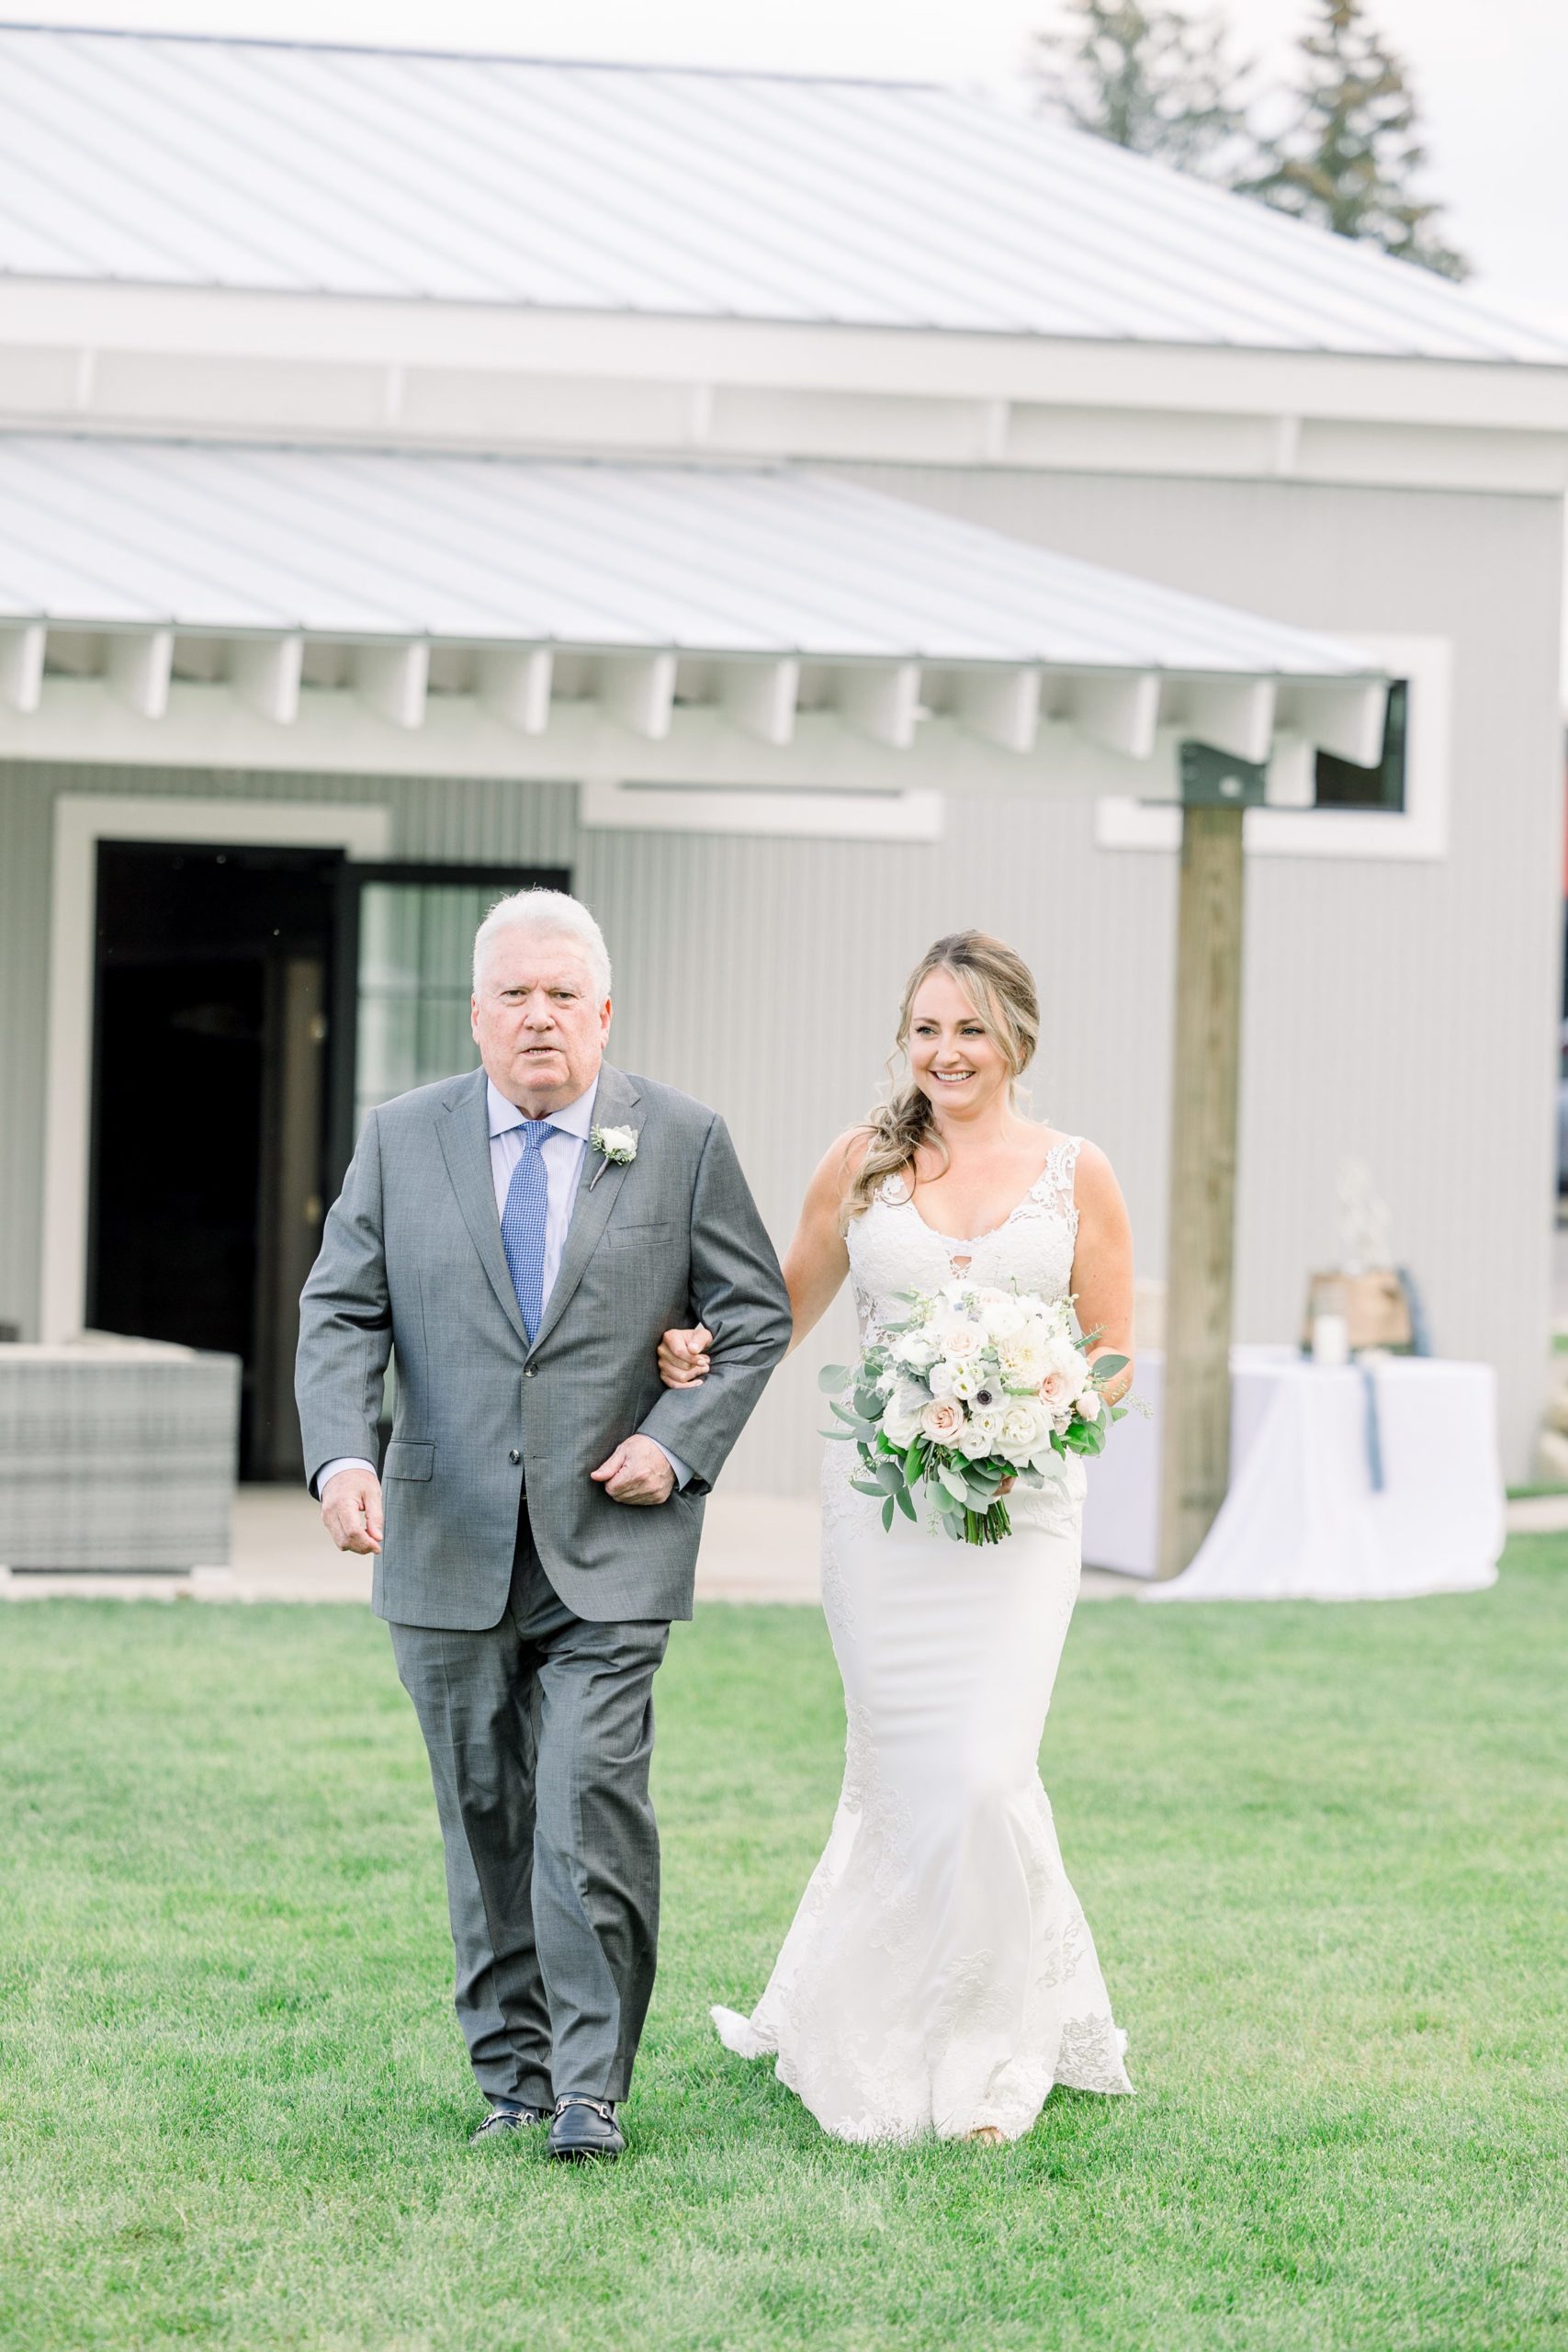 Bride walks down the aisle at The Boathouse on Lake Charlevoix wedding